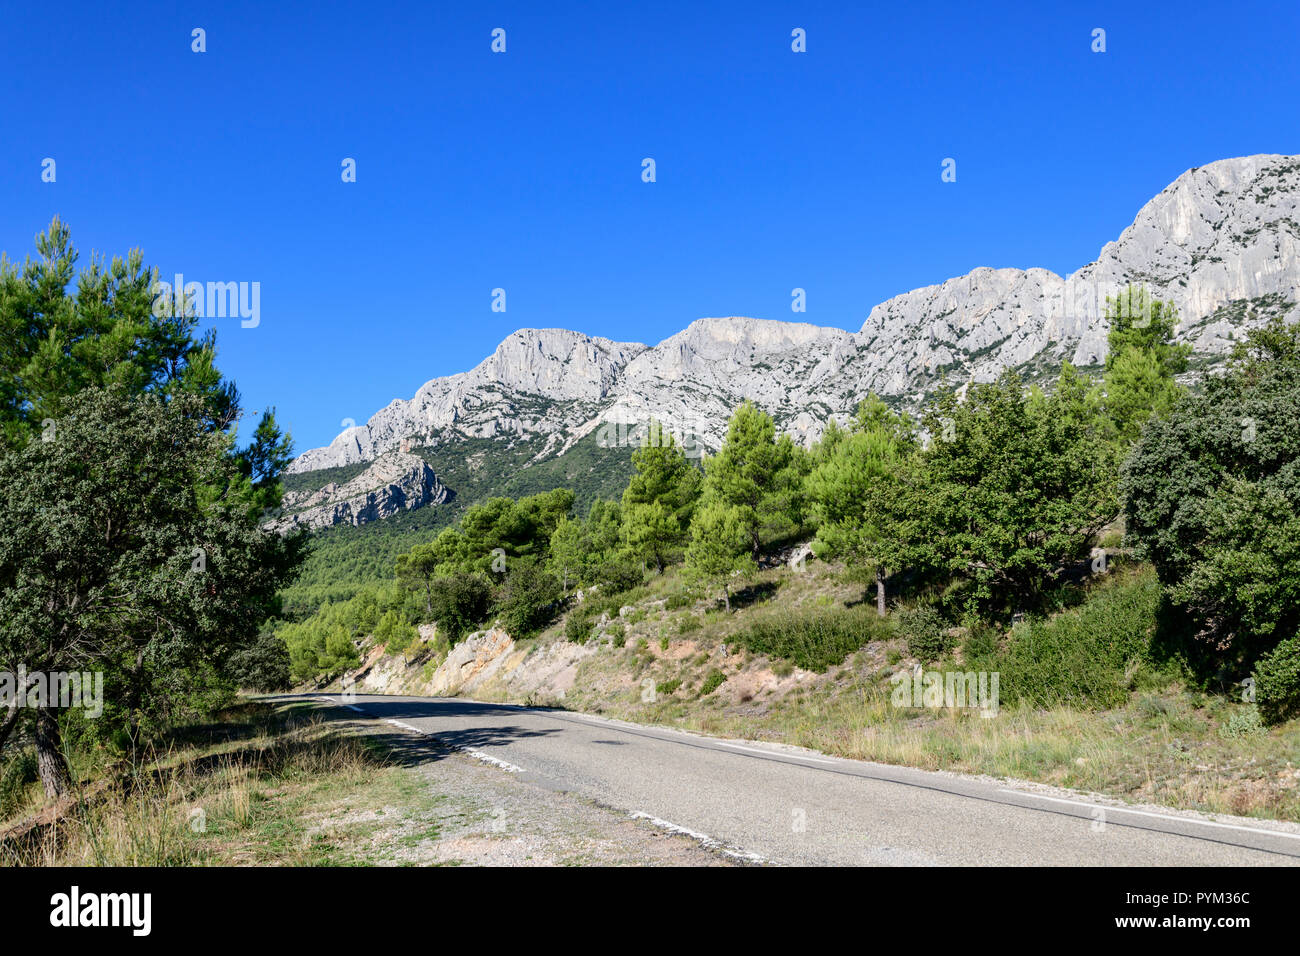 The famous and iconic Mount Sainte-Victoire in South of France  near a village called Puyloubier. France, Europe Stock Photo